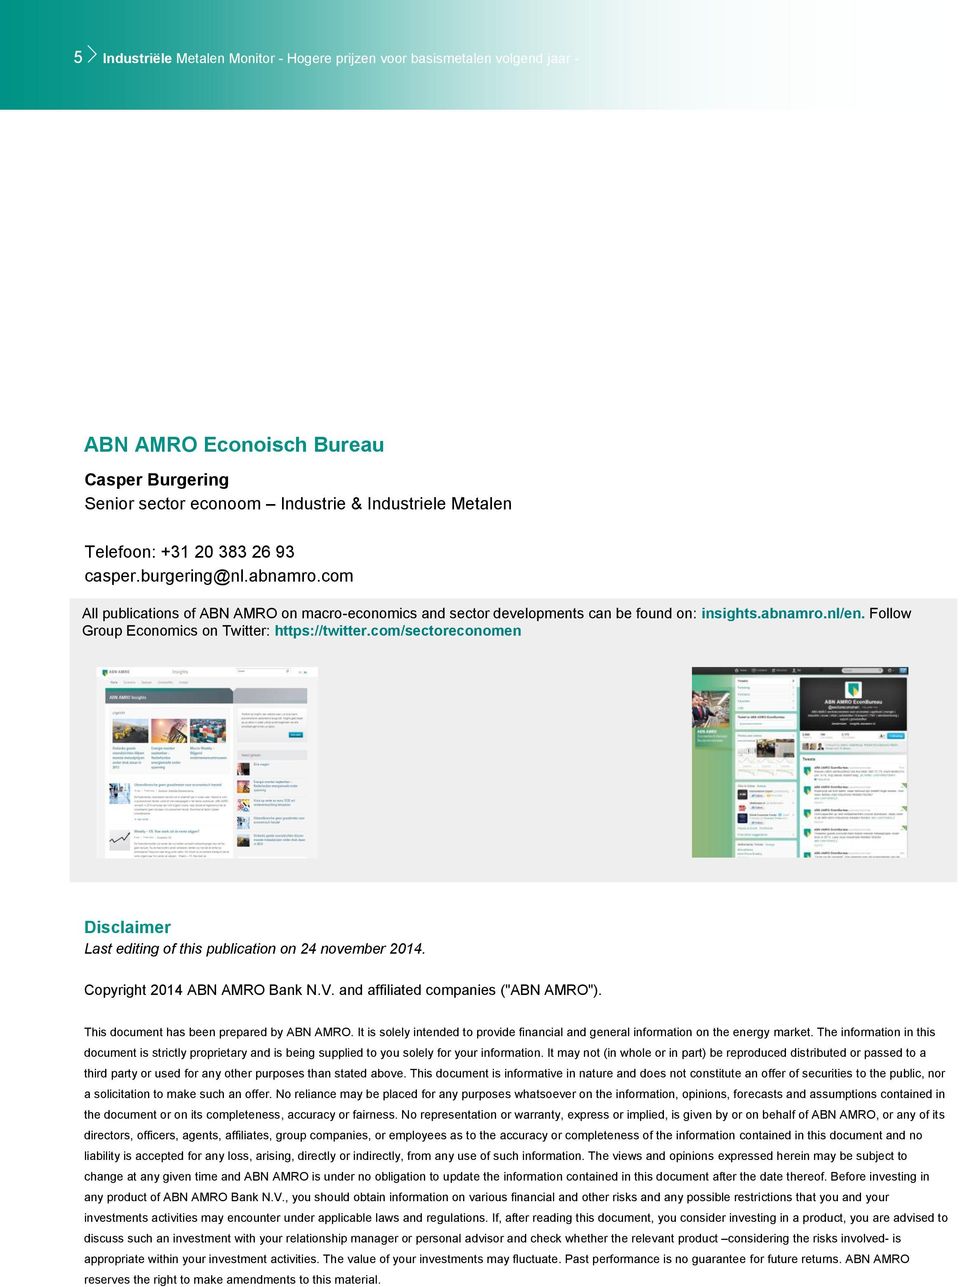 Follow Group Economics on Twitter: https://twitter.com/sectoreconomen Disclaimer Last editing of this publication on 24. Copyright 2014 ABN AMRO Bank N.V. and affiliated companies ("ABN AMRO").